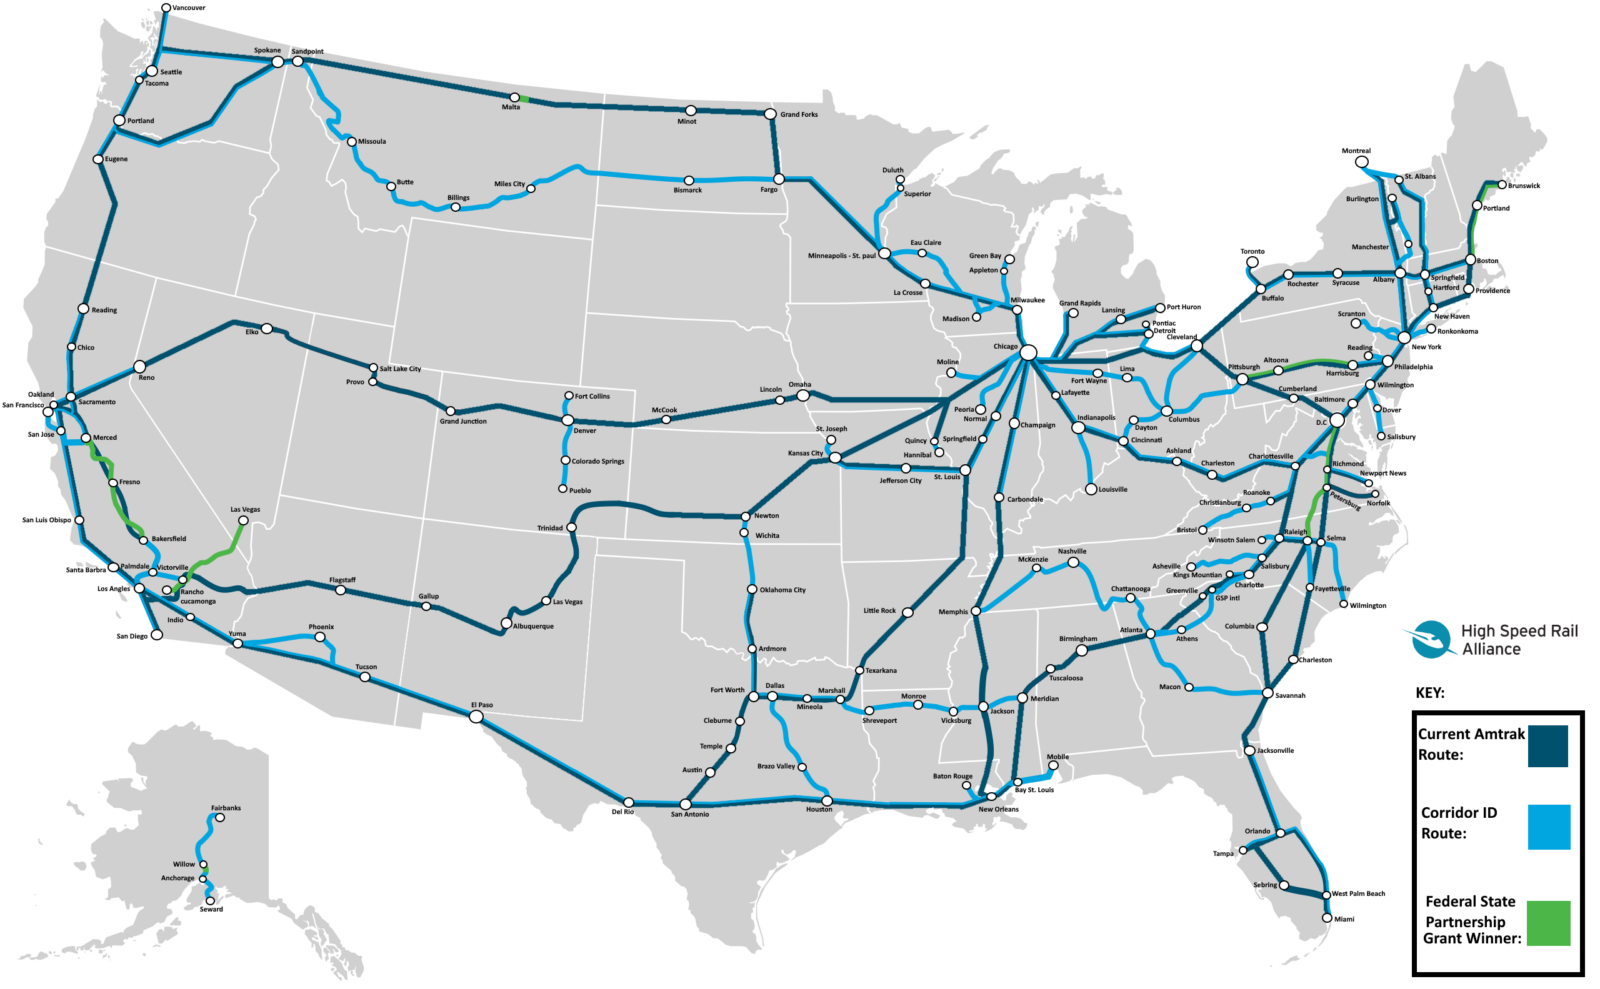 A map of existing Amtrak routes, routes with fed-state partnership grants and Corridor ID grants, as of 12/8/23